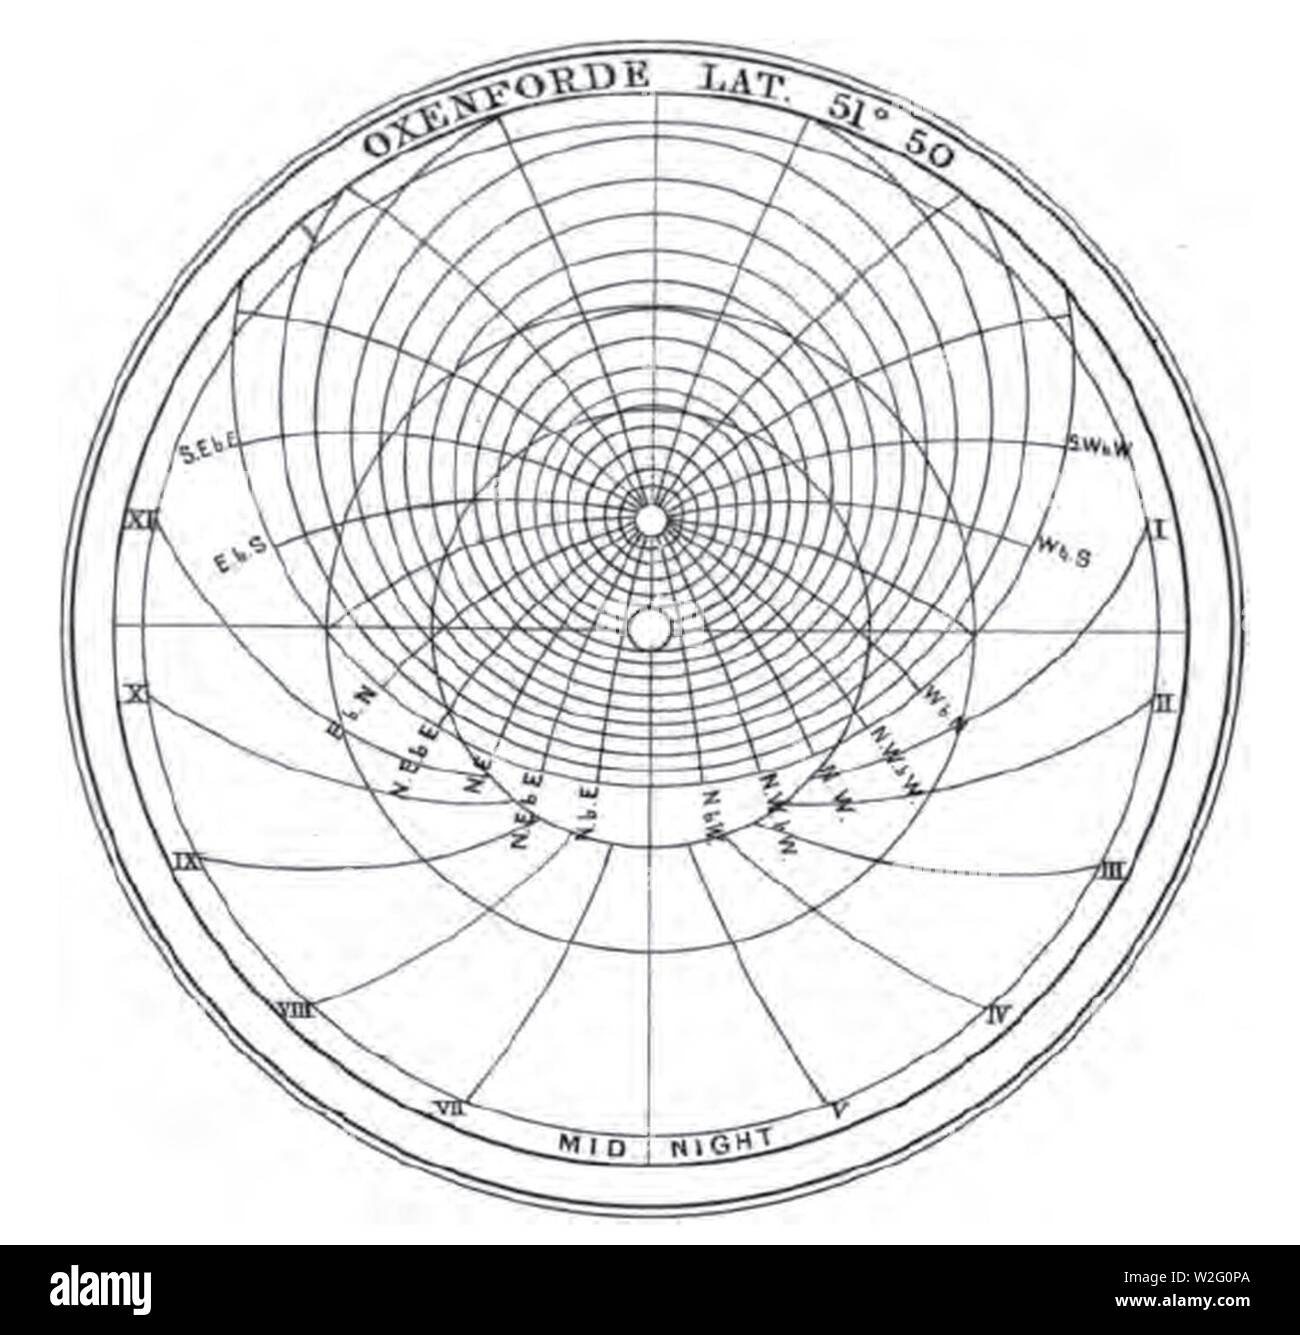 Chaucer astrolabe 3. Stock Photo